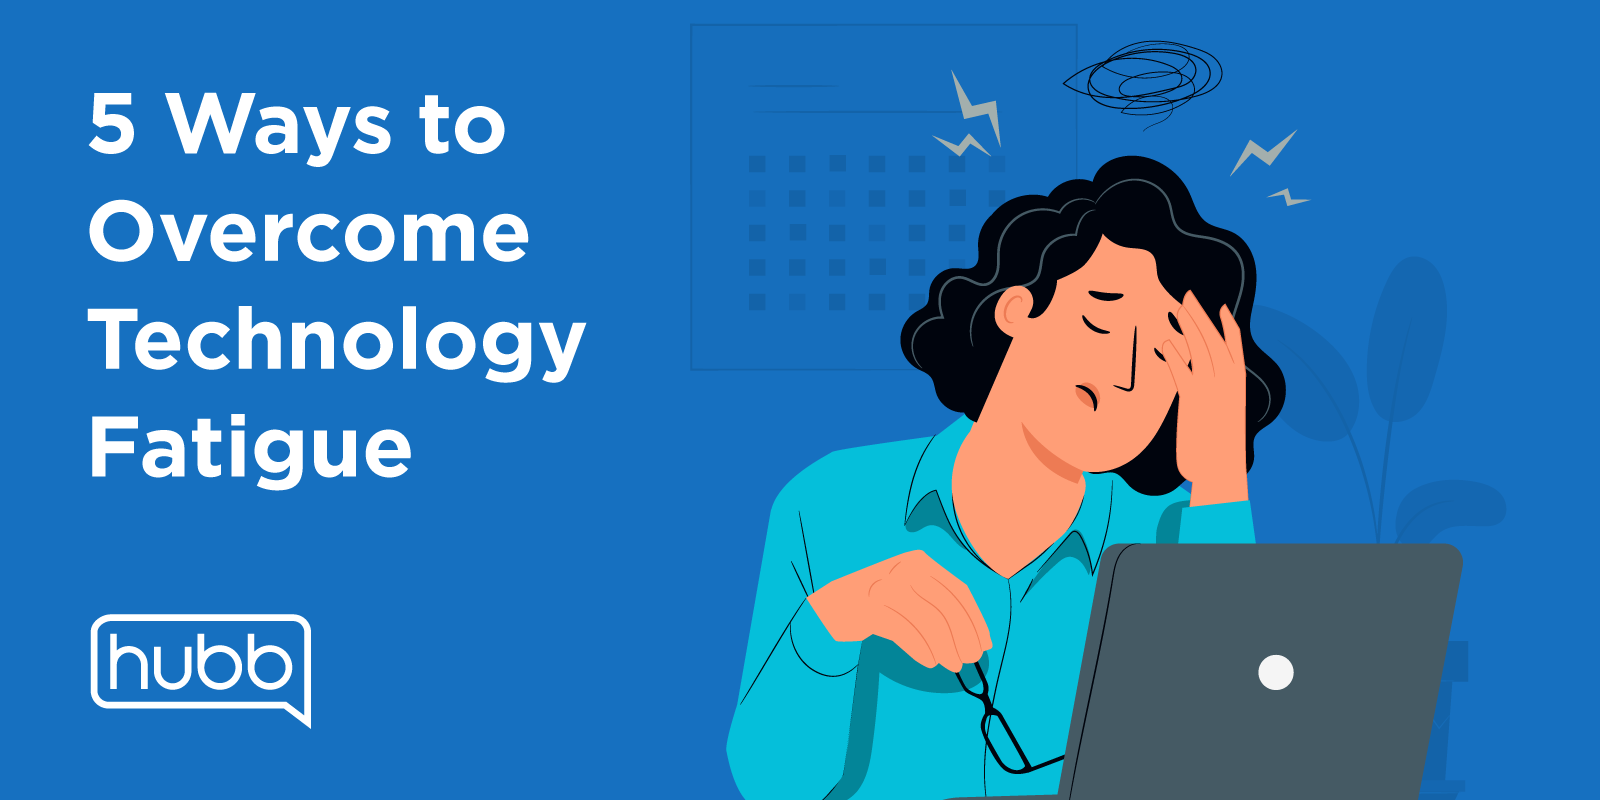 5 Ways to Overcome Technology Fatigue with illustration of woman looking tired at her laptop